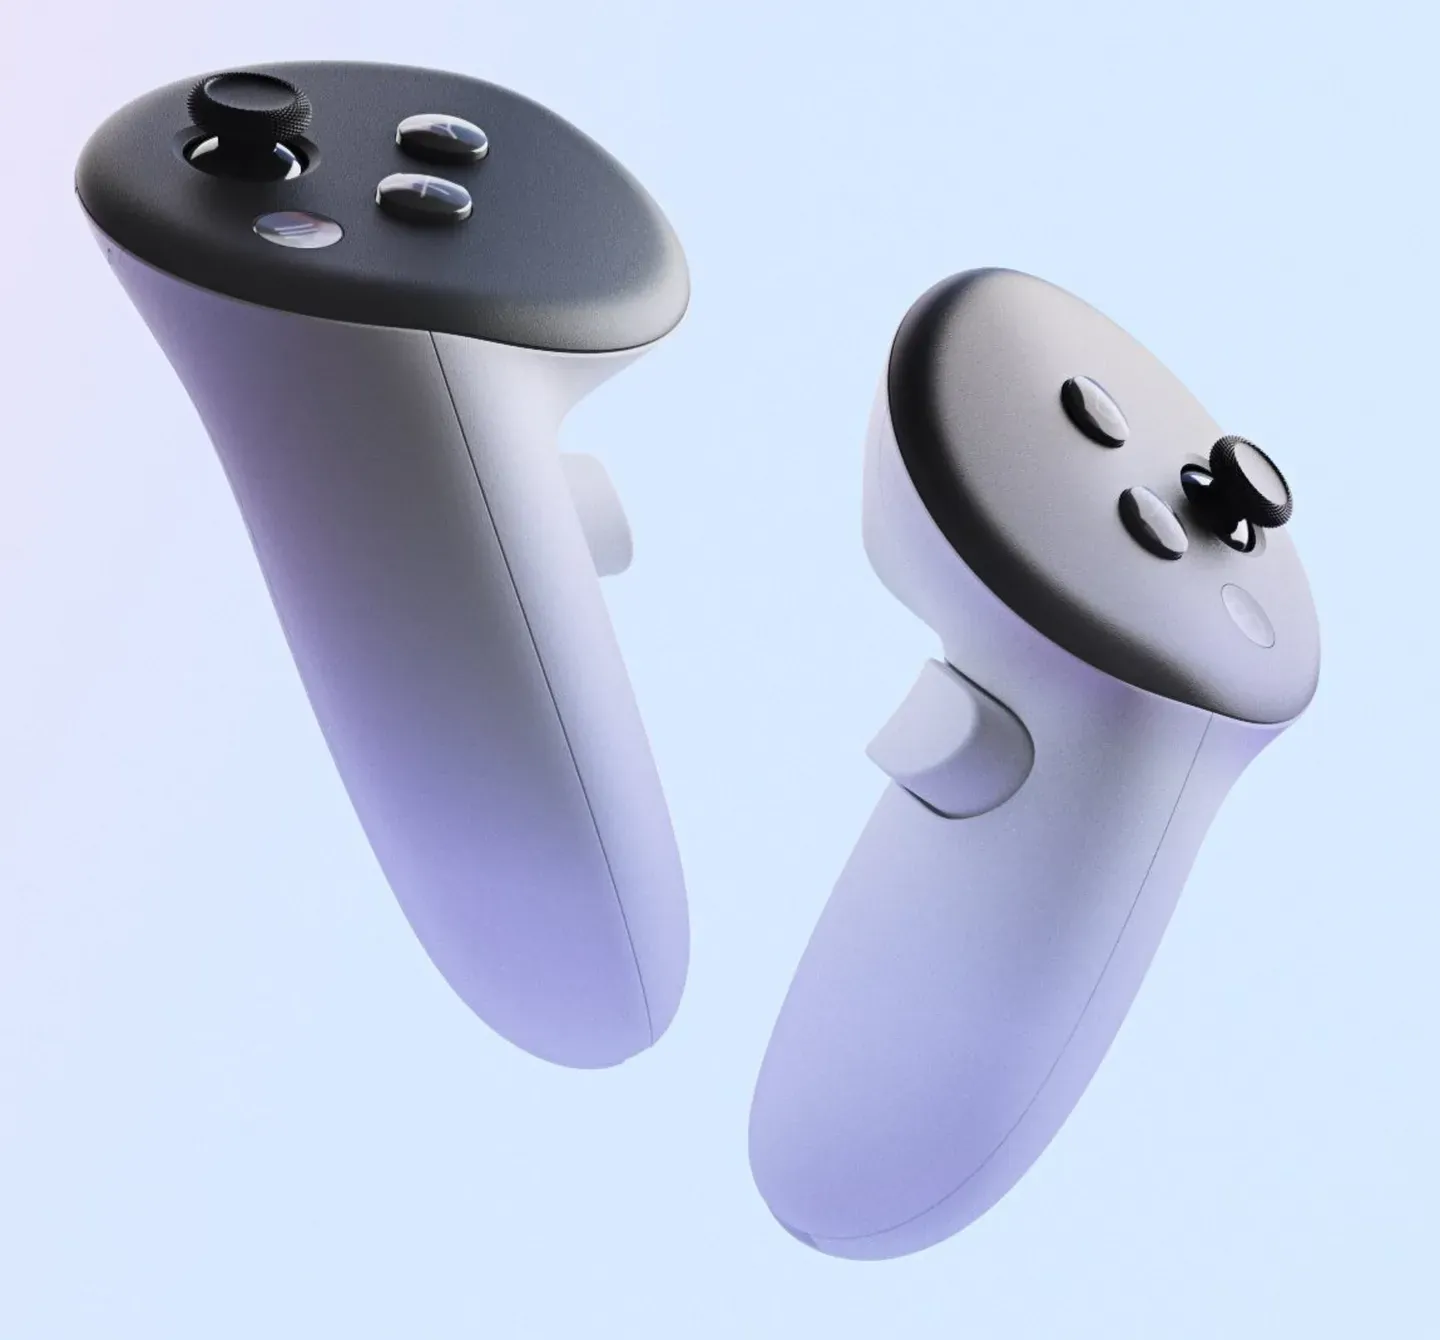 Quest 3 Touch Pro controllers Image- Meta